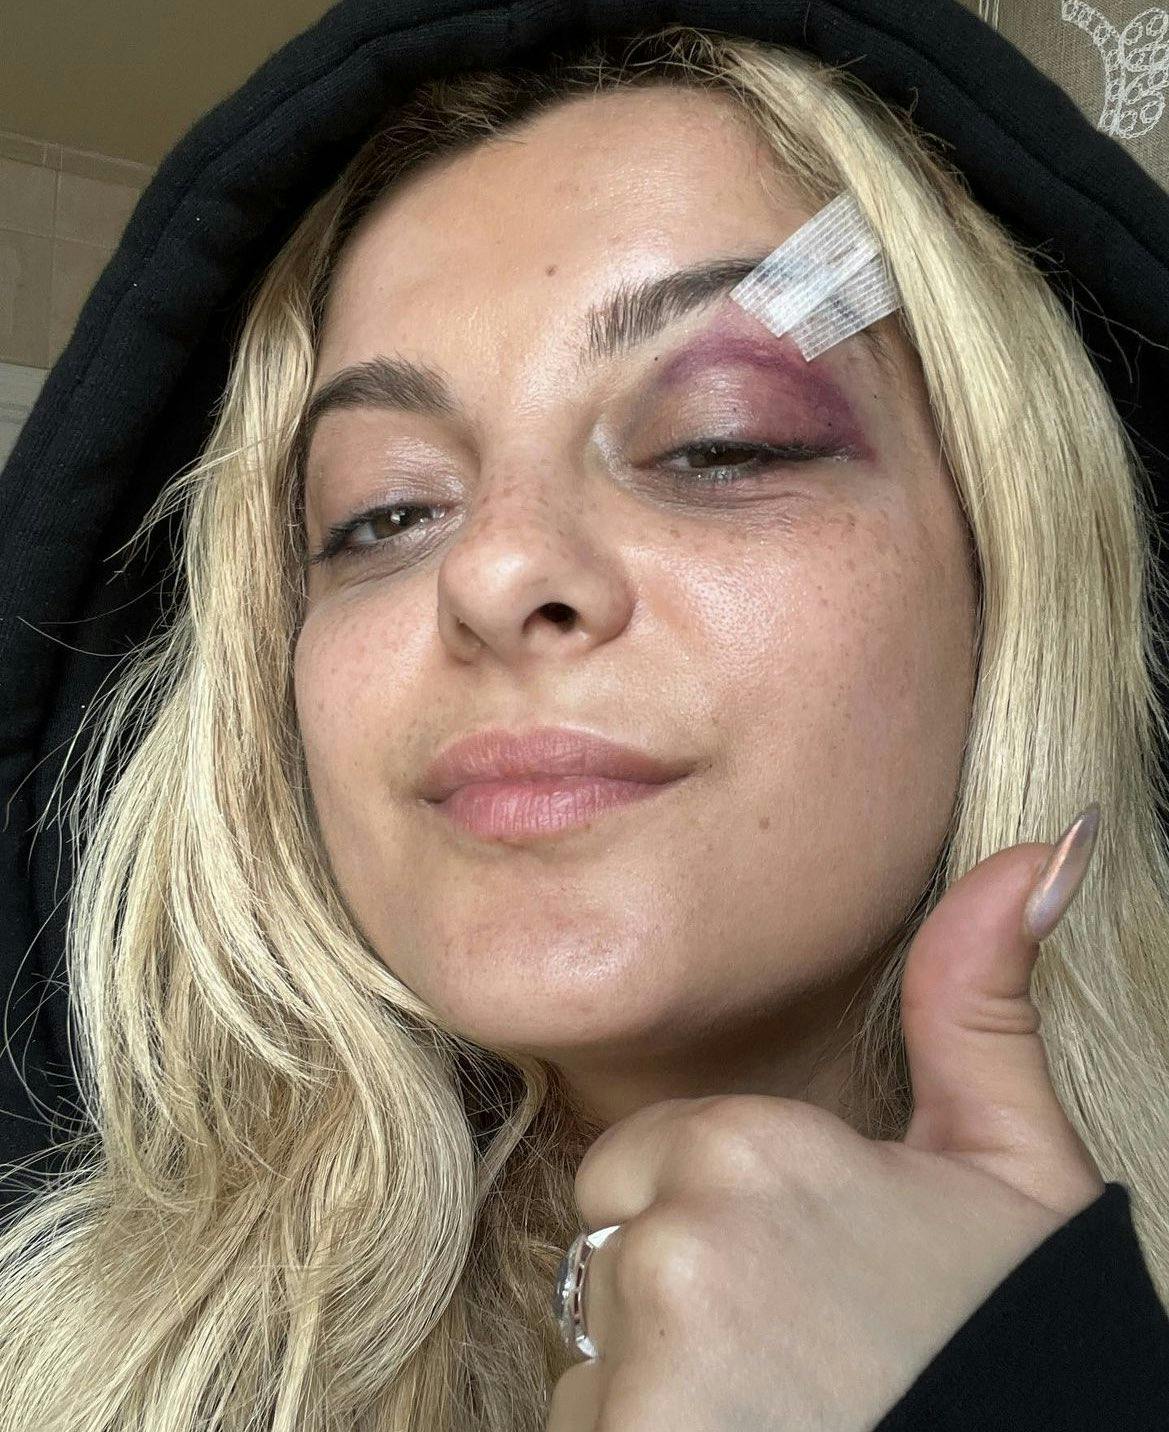 bebe rexha showing a thumbs up and a bruised eye with stitches above the eyelid